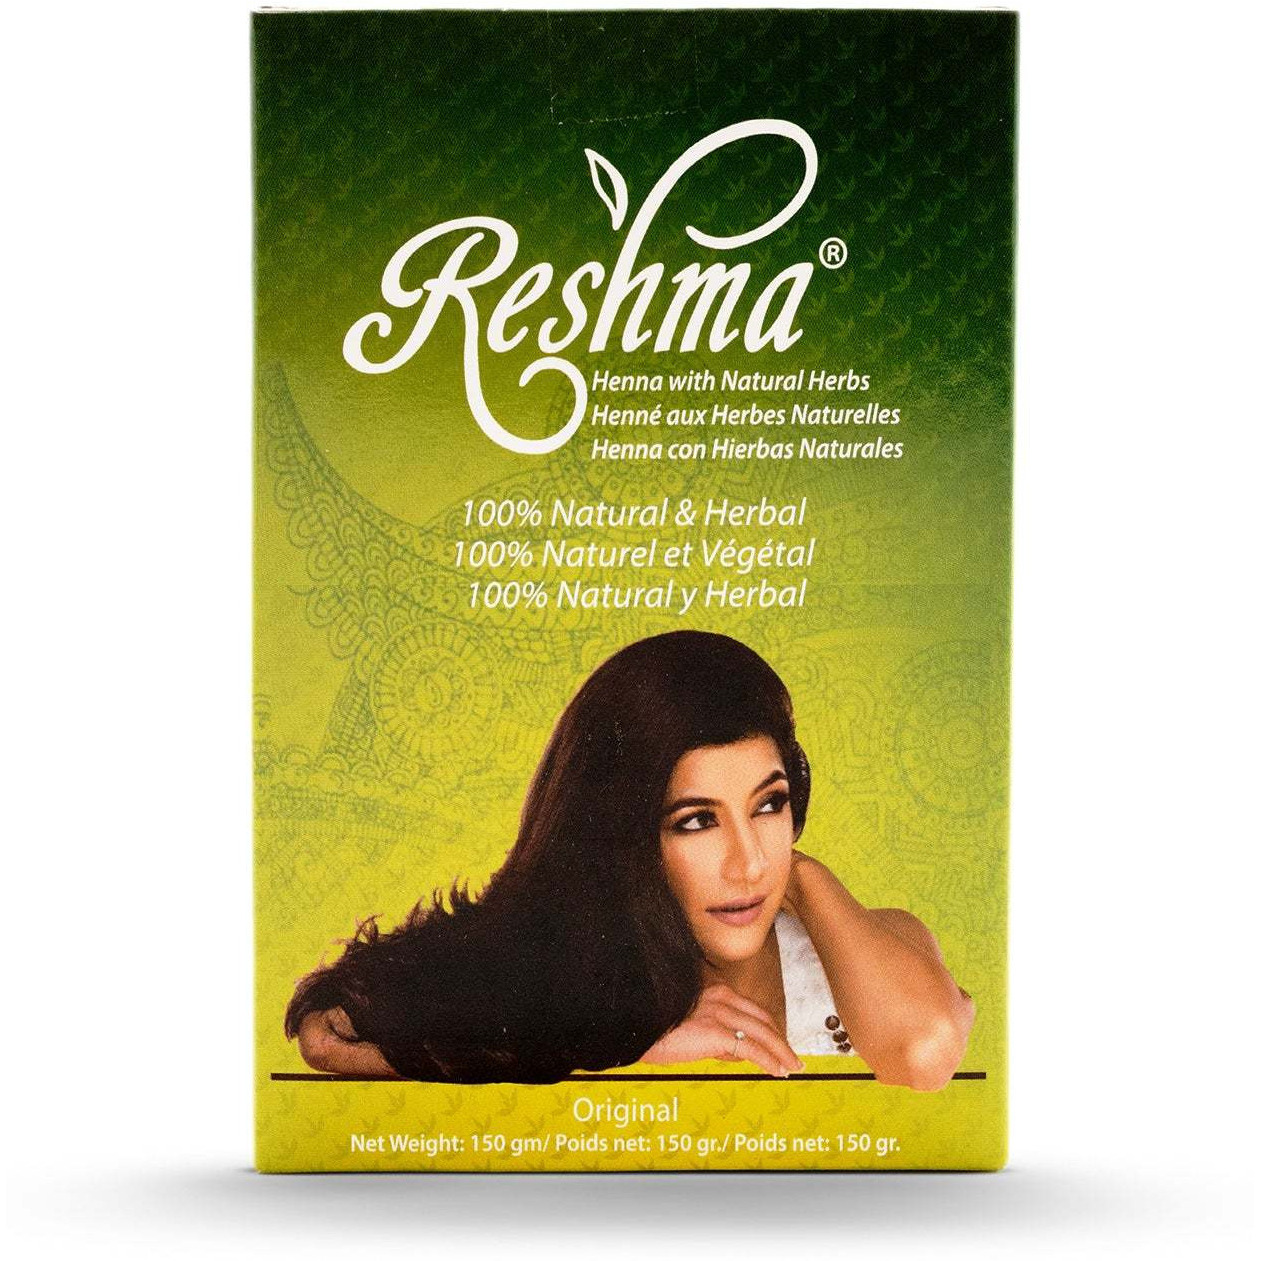 Pack of 4 - Reshma Henna With Natural Herbs - 150 Gm